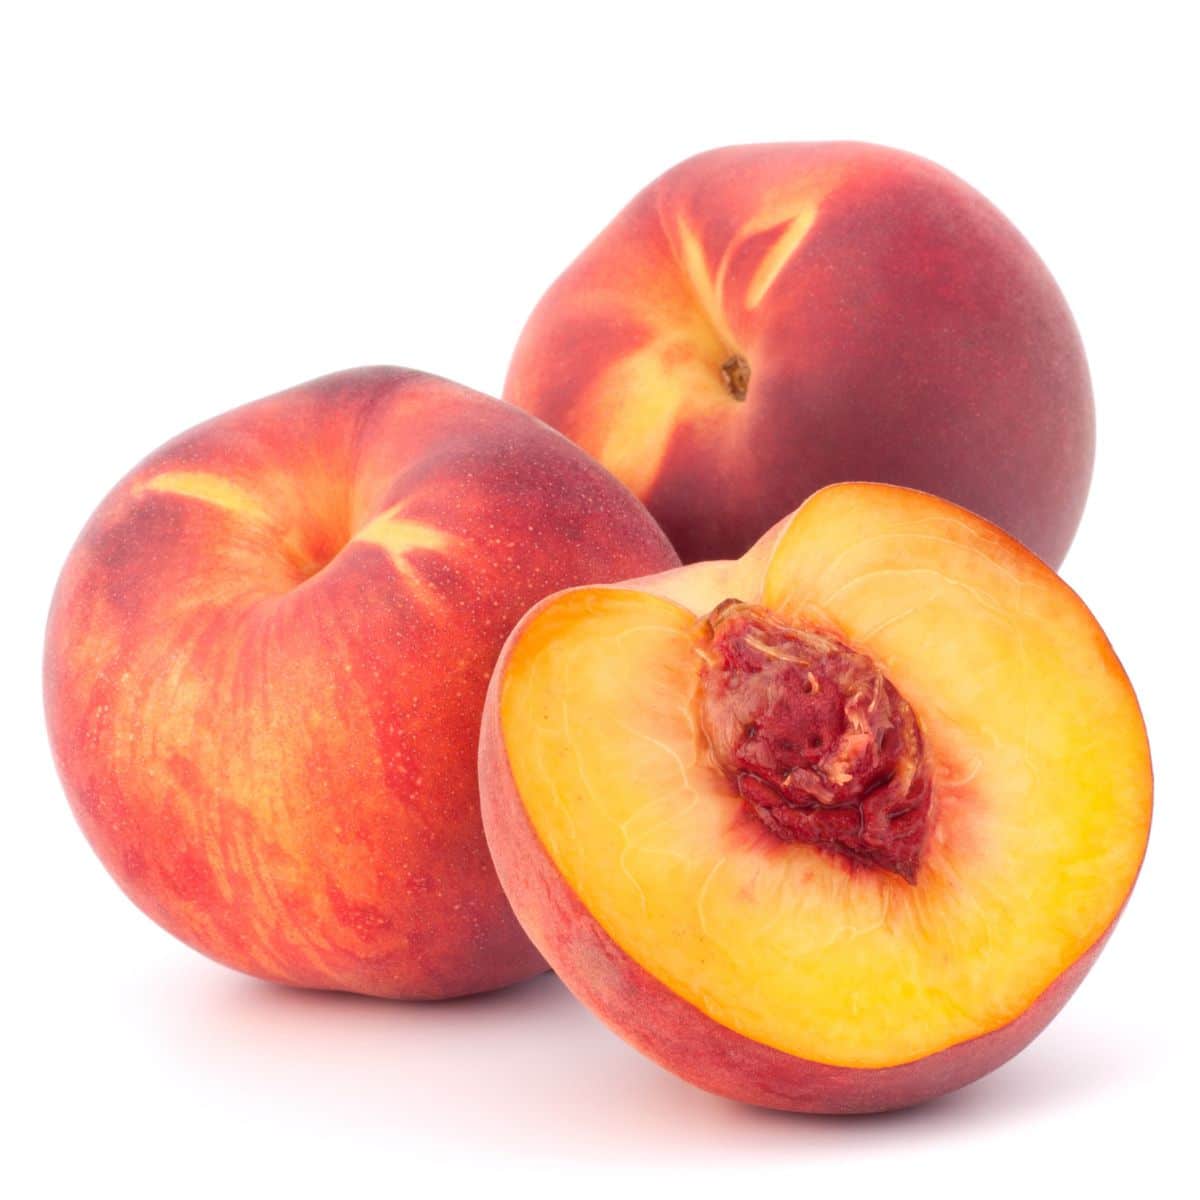 Gold dust peaches on a white background.